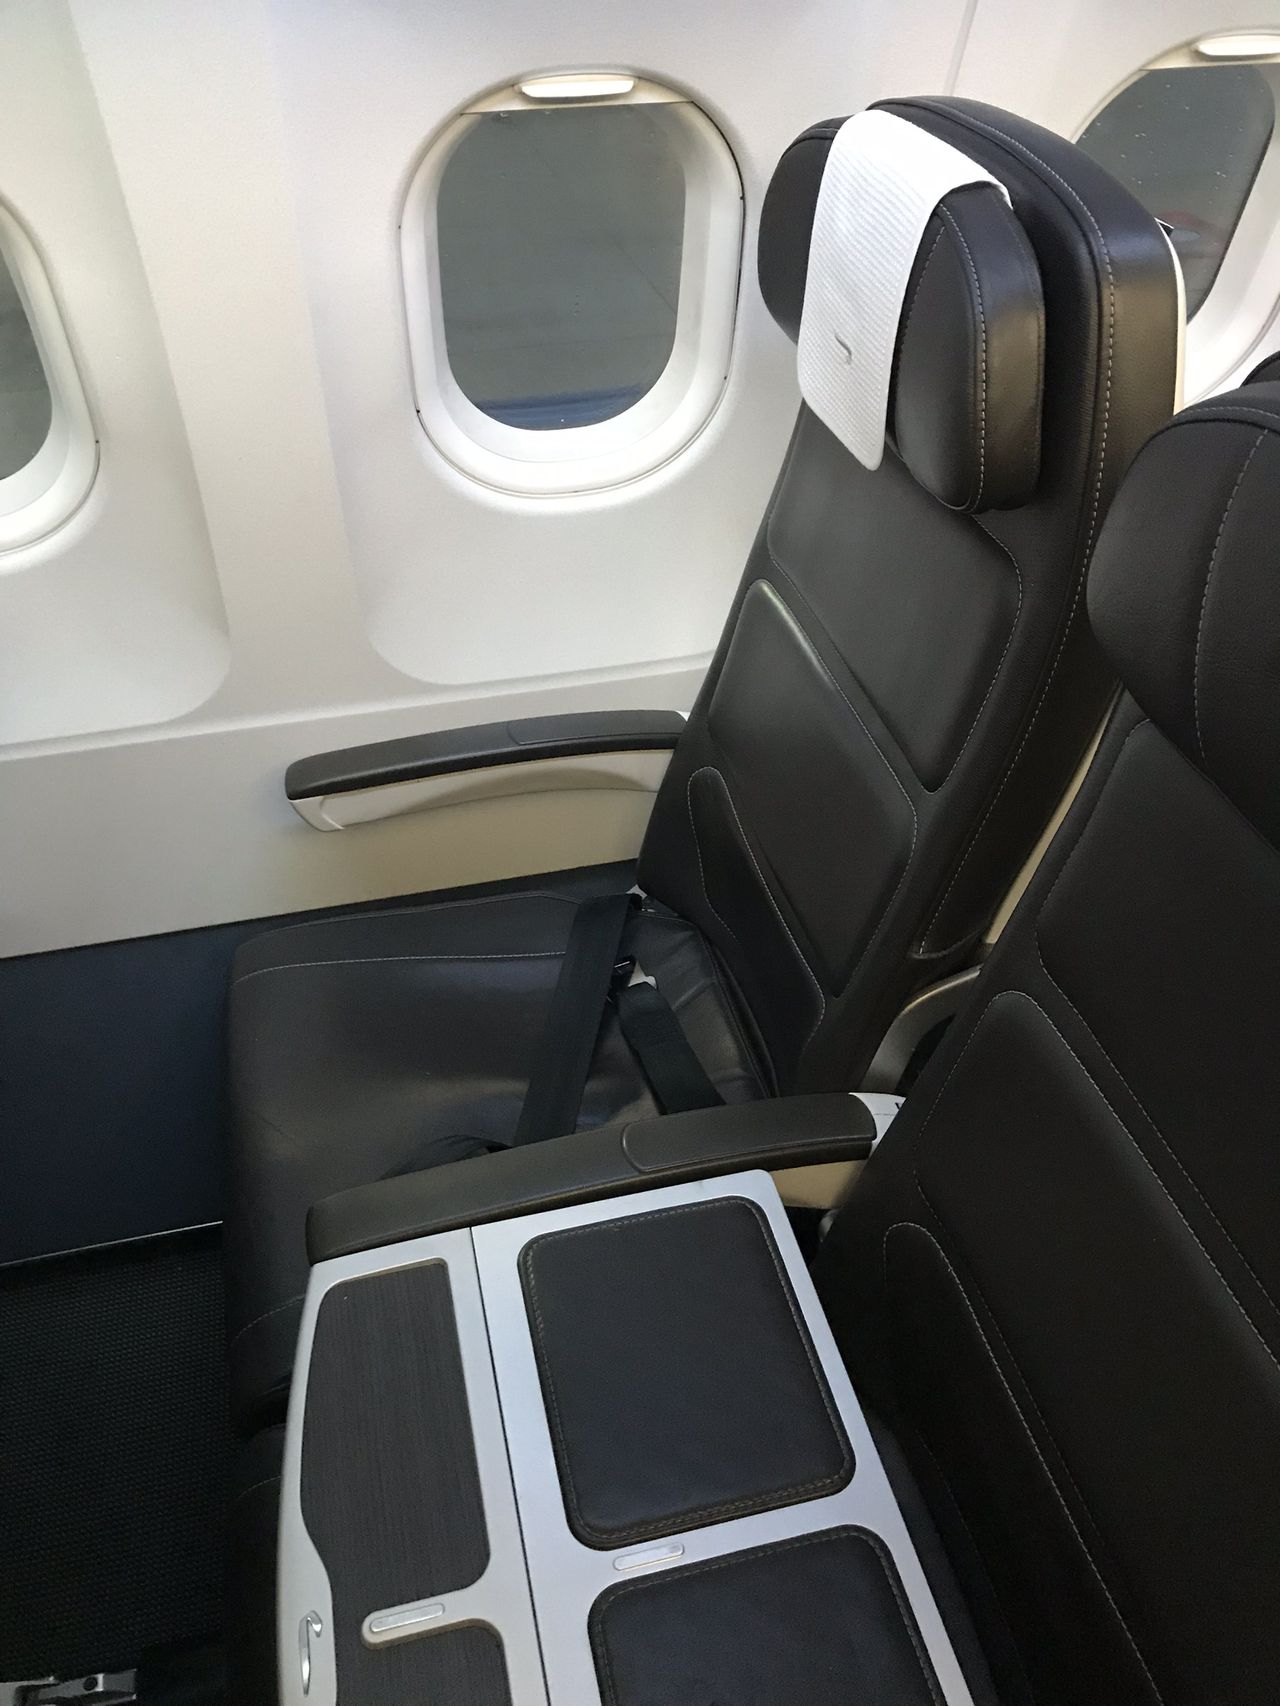 Review of British Airways flight from Munich to London in Business